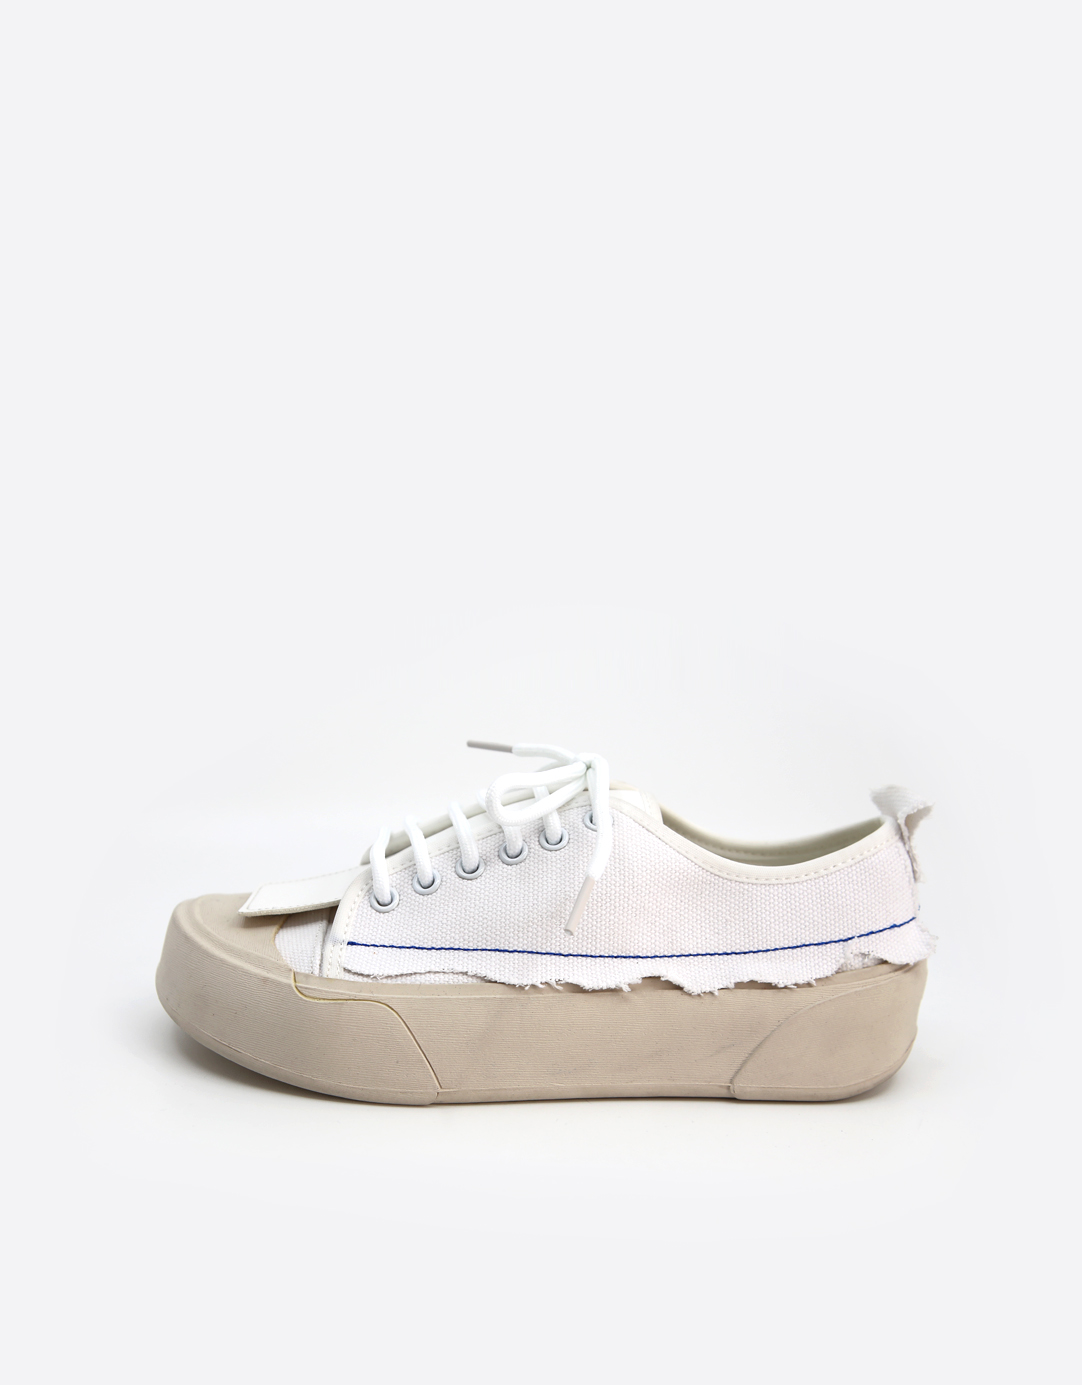 VINTAGE LACE UP WHITE SNEAKERS